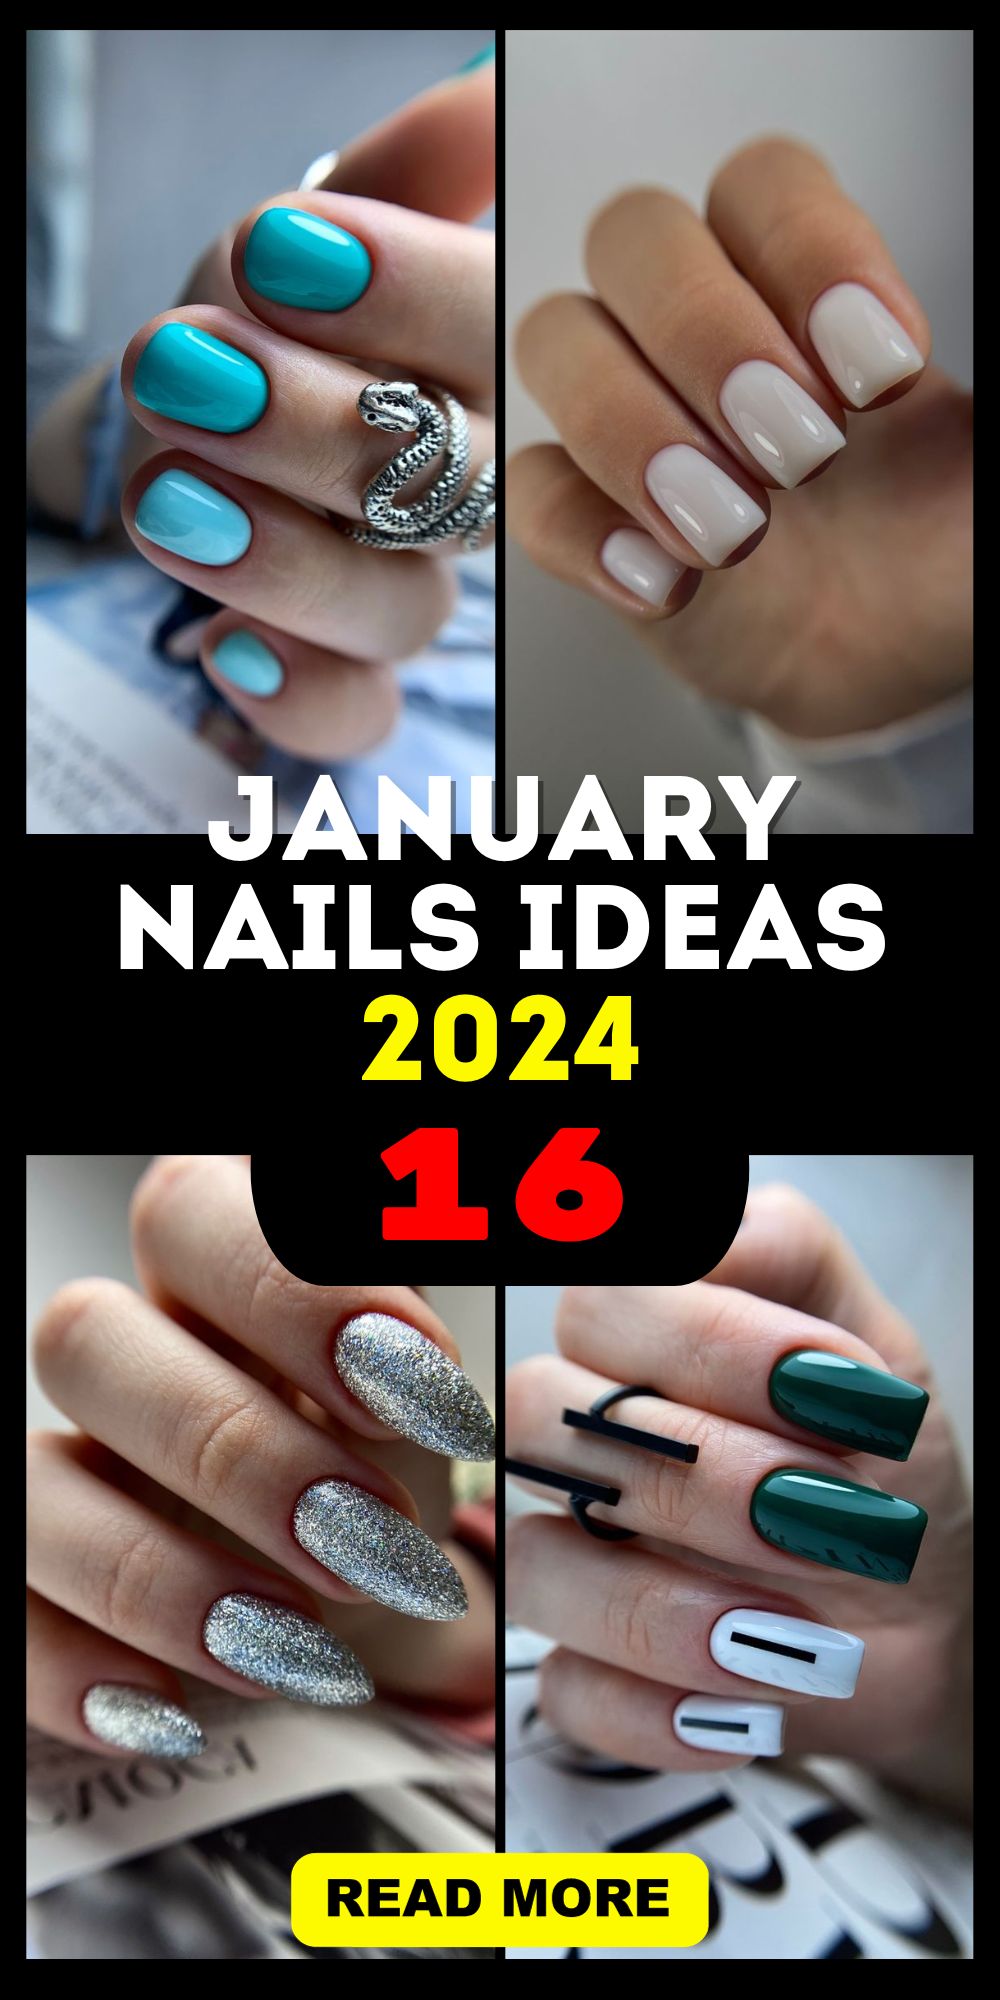 Embrace January 2024 with Stunning Simple & Chic Nail Designs